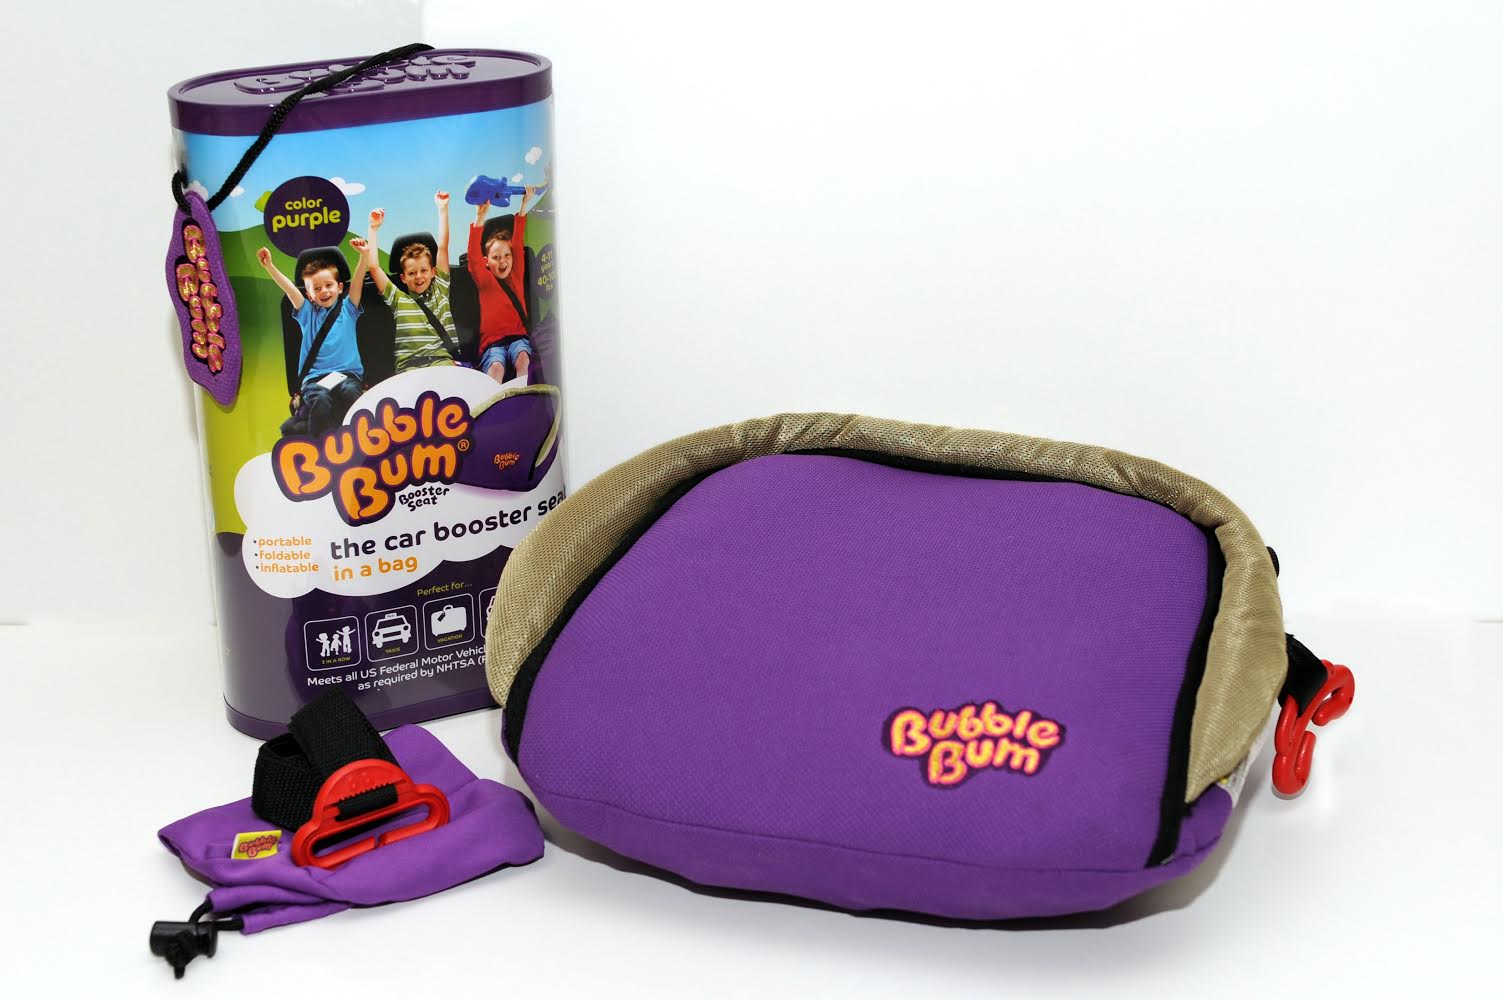 Bubblebum inflatable car booster seat, $29.99 @bubblebum.co